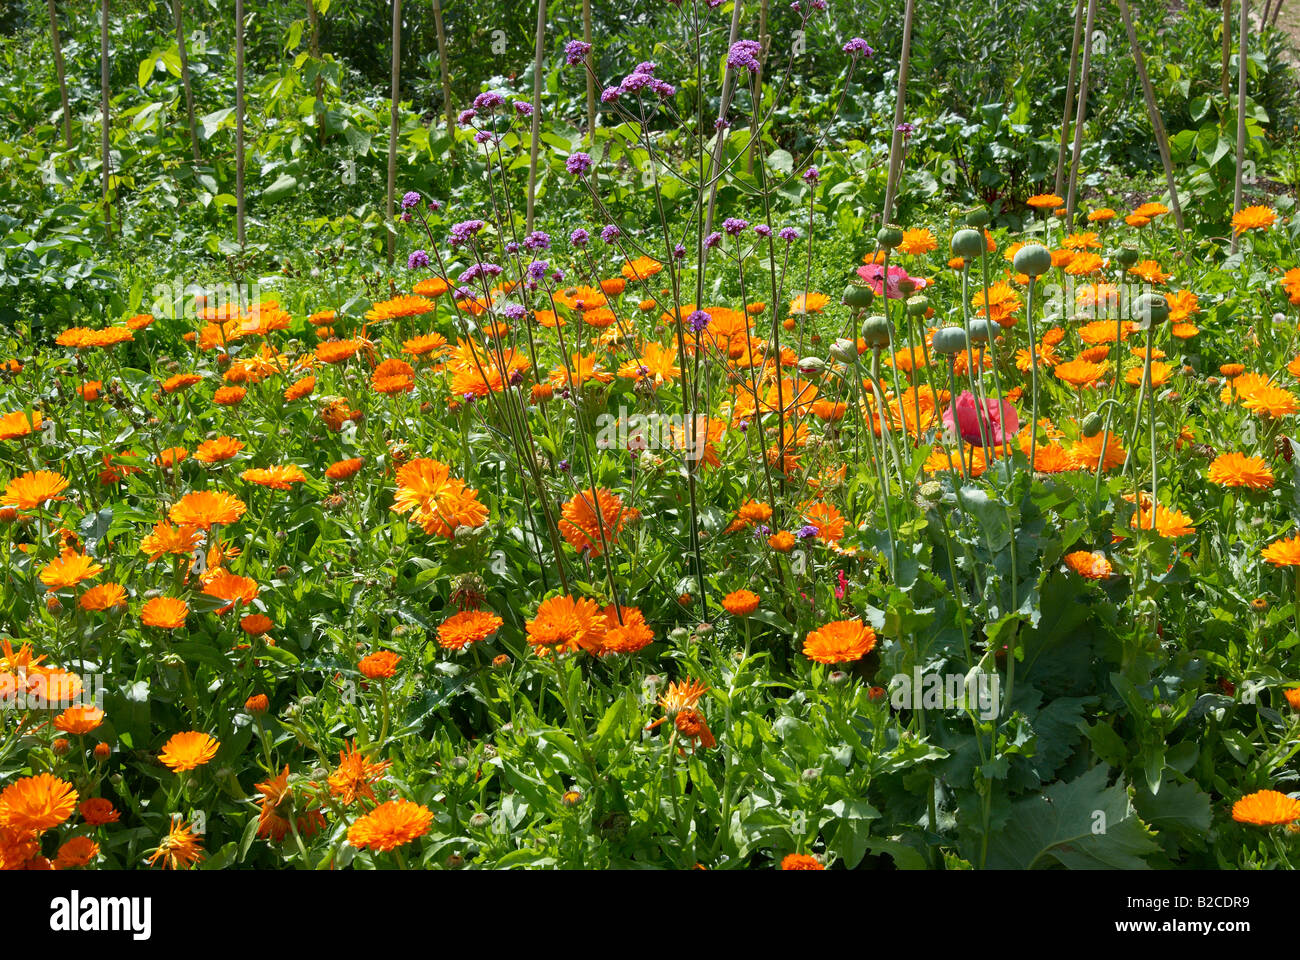 Calendula officinalis or English or pot marigold growing in the herb area of a traditional vegetable garden, Hampshire, England Stock Photo